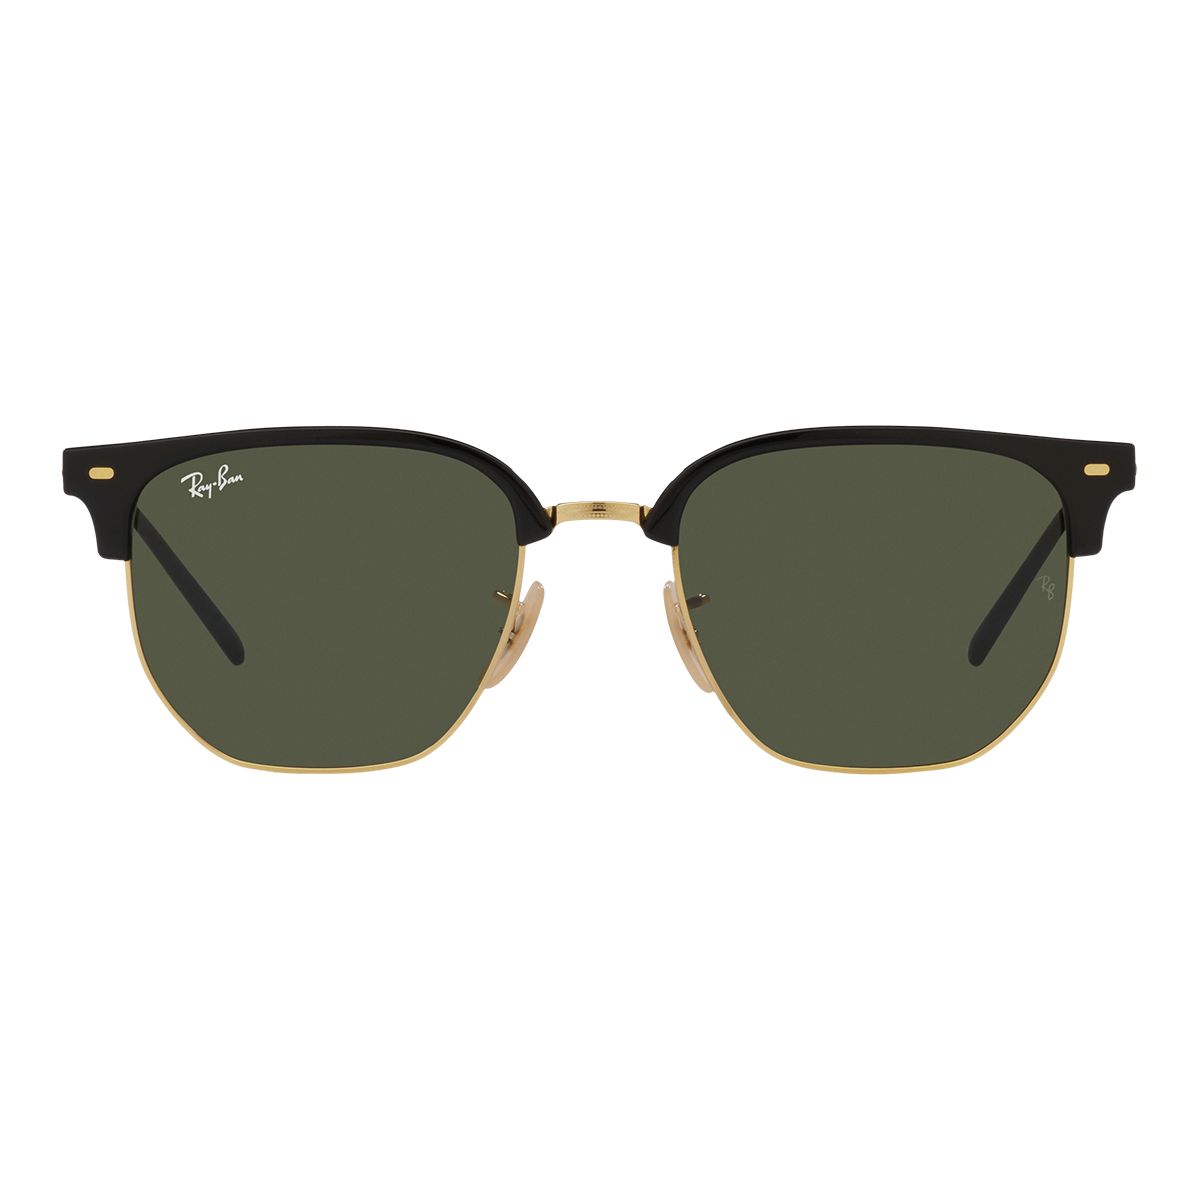 Image of Ray-Ban New Clubmaster Sunglasses